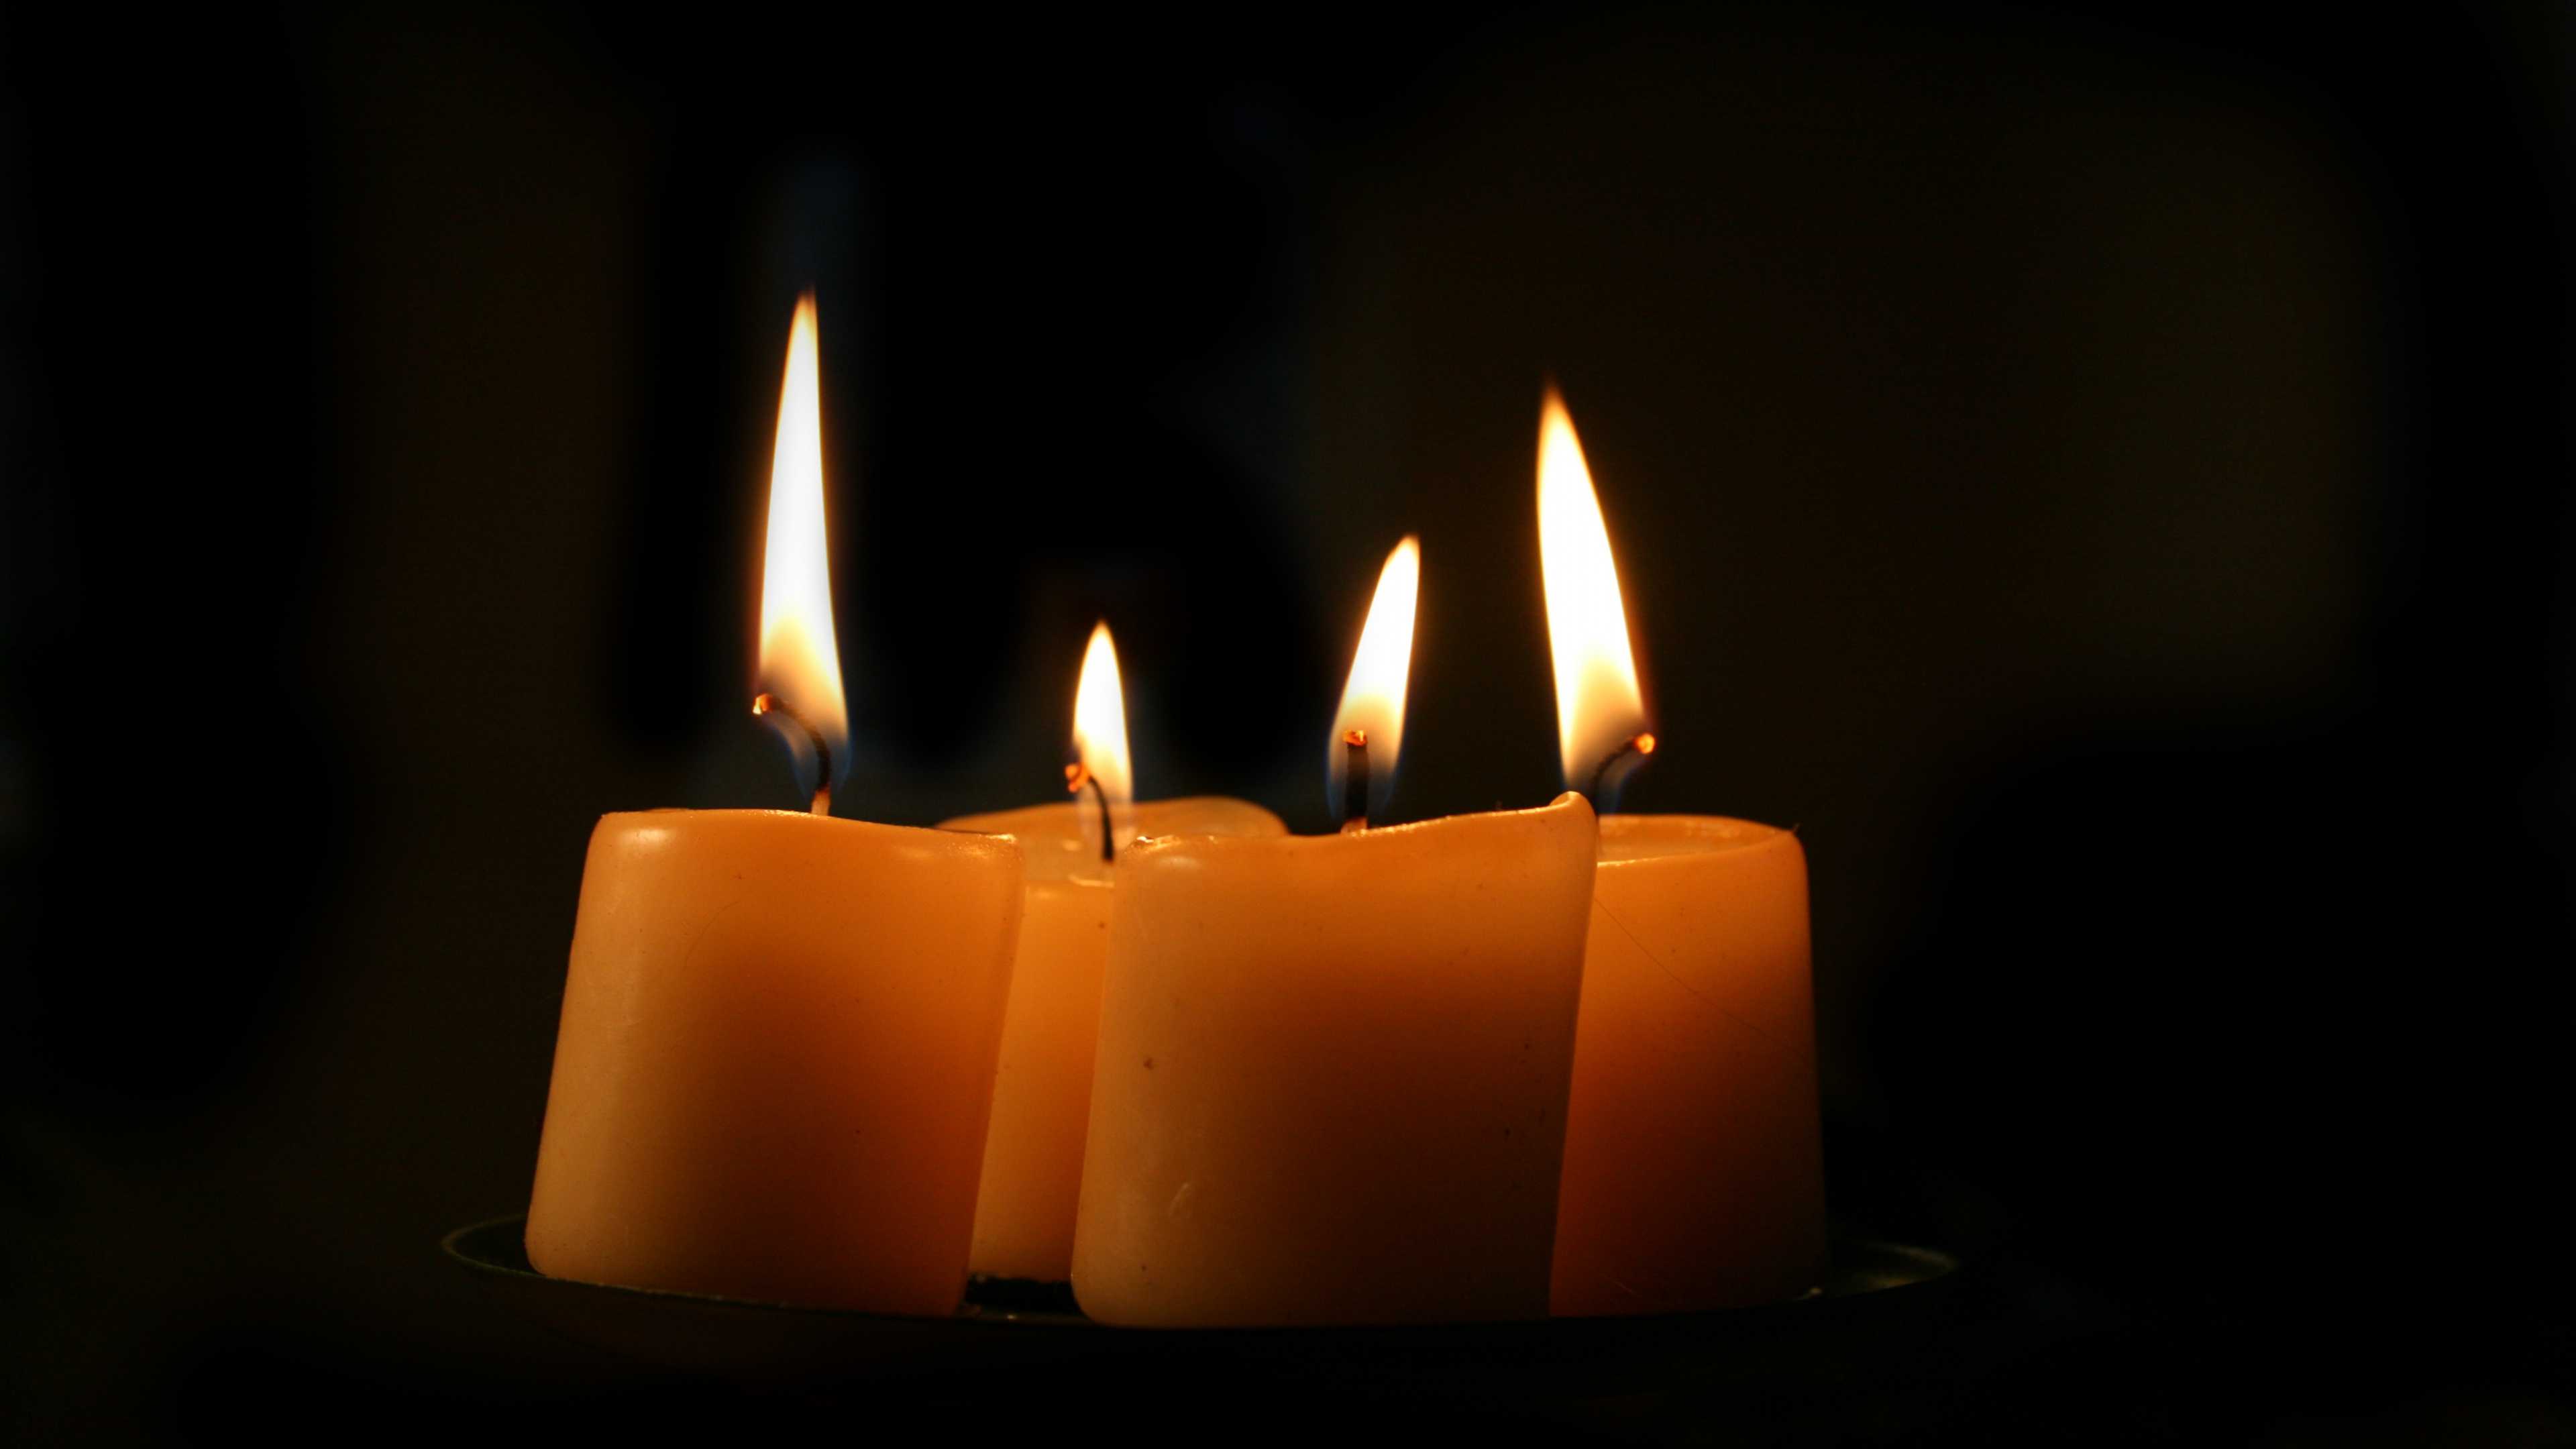 3 Lighted Candles on Black Background. Wallpaper in 3840x2160 Resolution